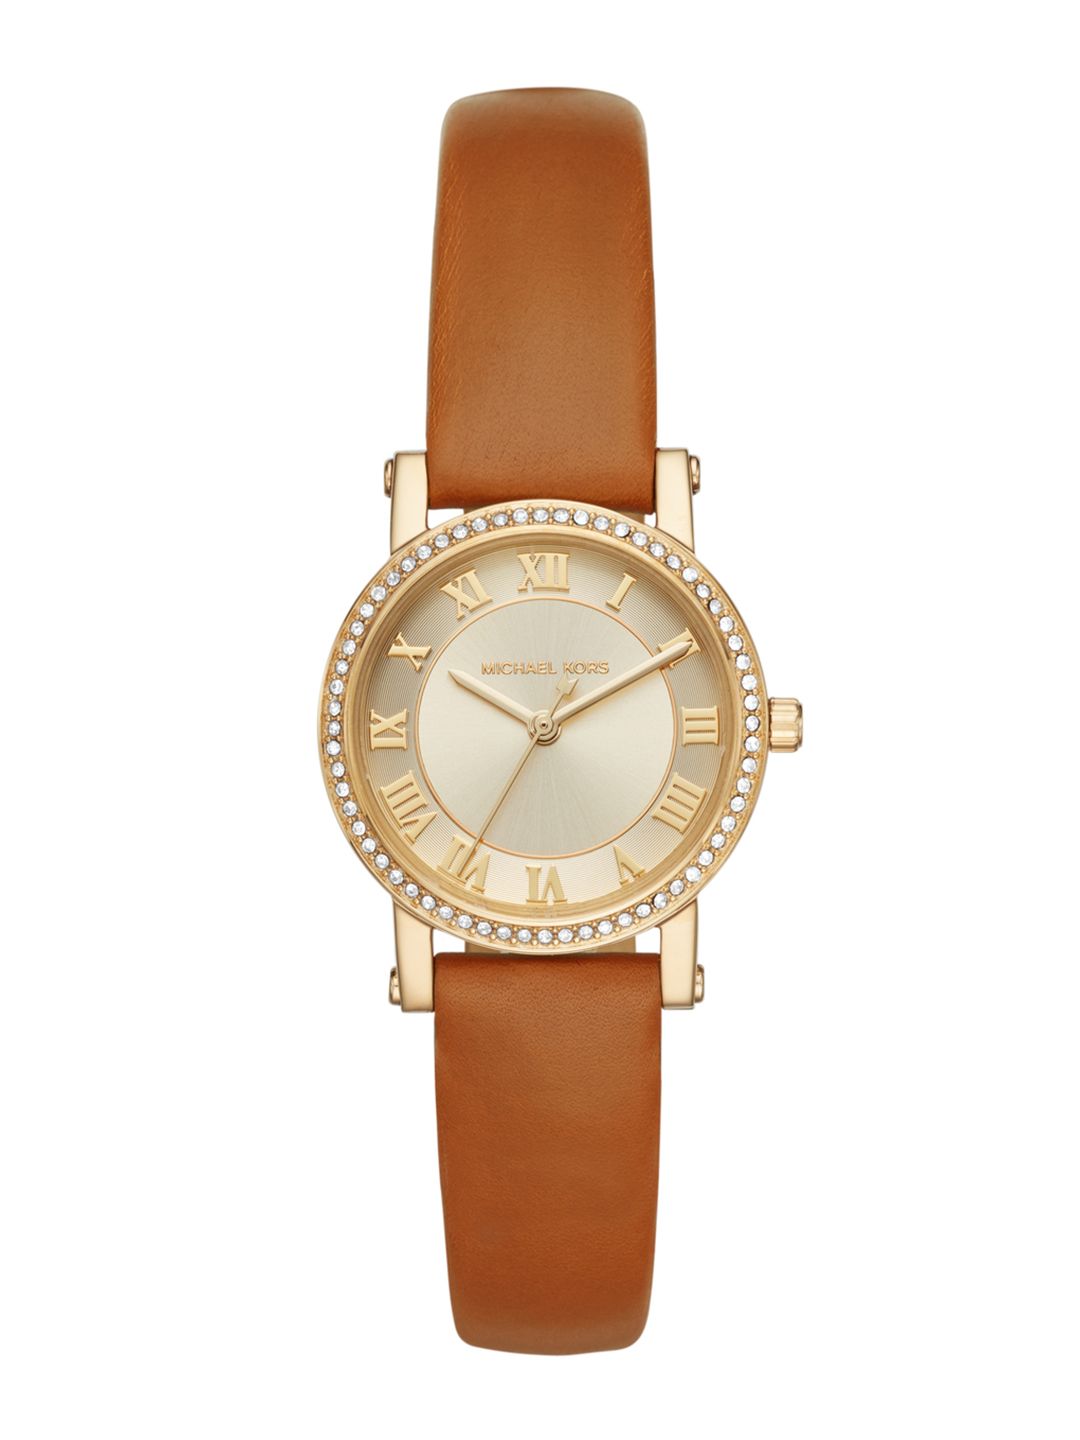 Michael Kors Women Gold-Toned Dial & Brown Leather Straps Analogue Watch MK2697 Price in India